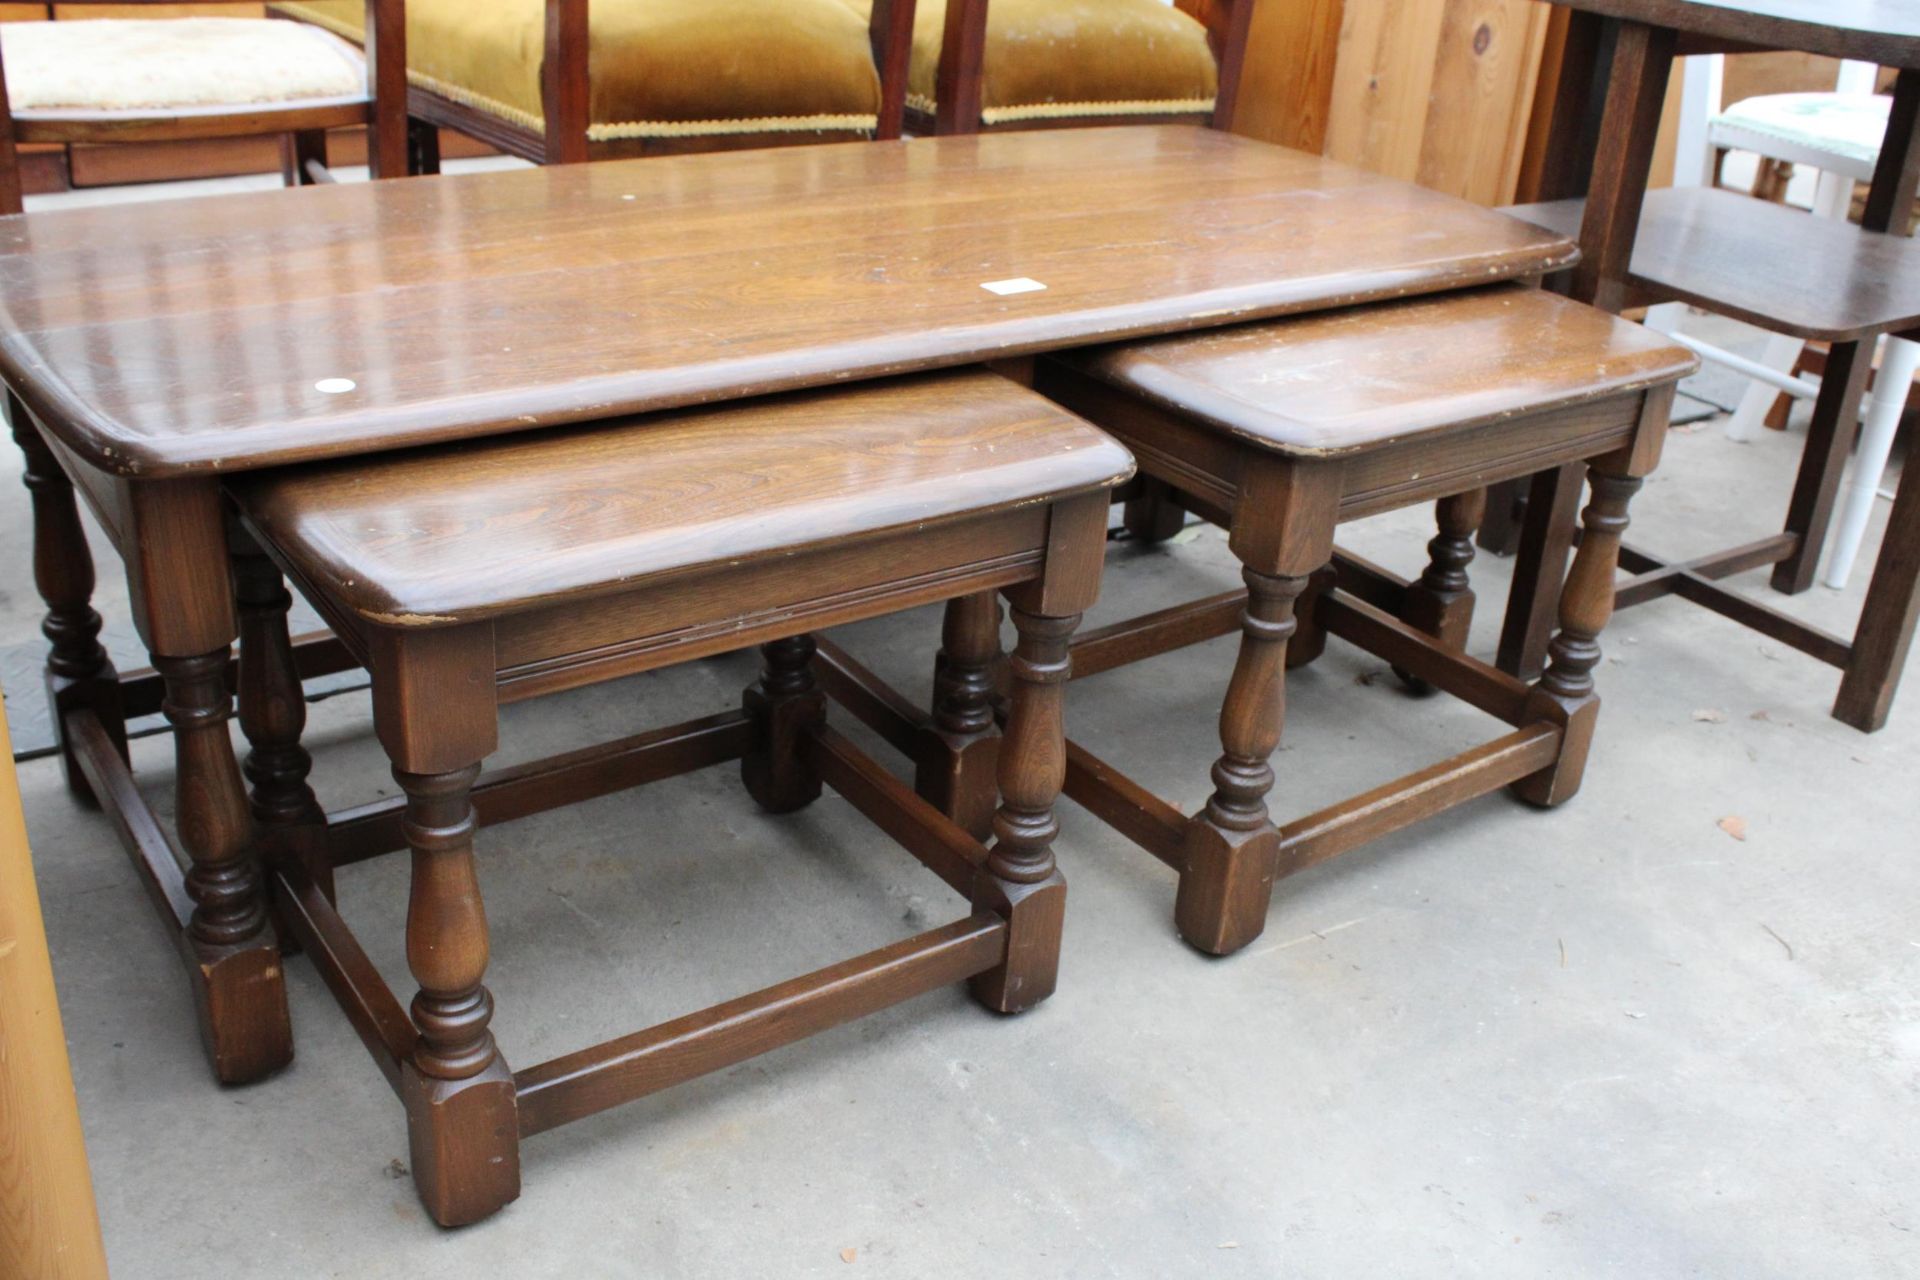 AN ELM ERCOL OLD COLONIAL STYLENEST OF THREE TABLES - Image 2 of 2